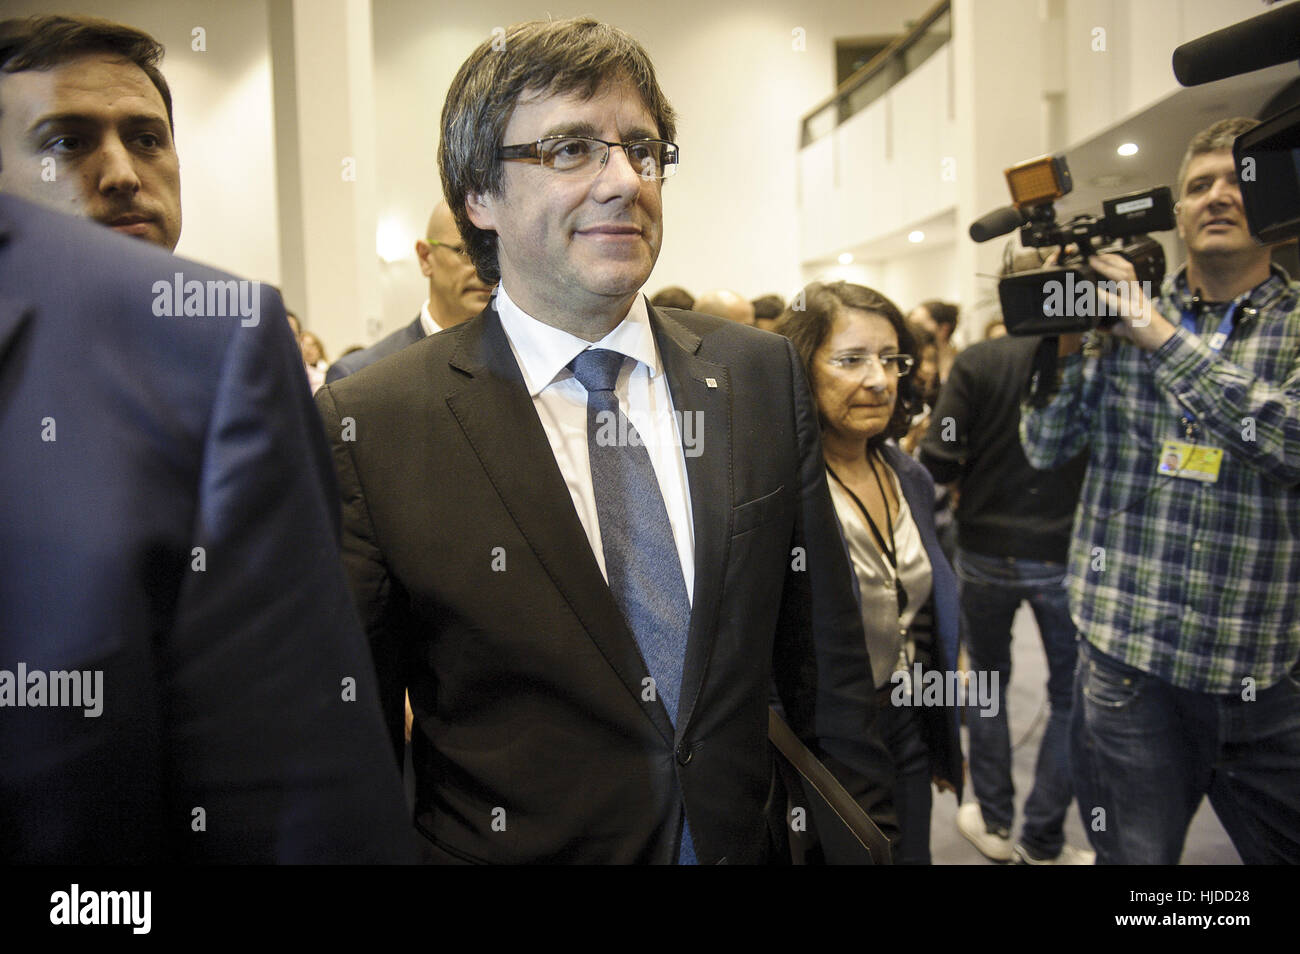 Brussels, Belgium. 24th Jan, 2017. Carles Puigdemont President of the Catalan government take part in the conference on The Catalan Independence Referendum at European Parliament headquarters in Brussels, Belgium on 24.01.2017 by Wiktor Dabkowski | usage worldwide Credit: dpa/Alamy Live News Stock Photo